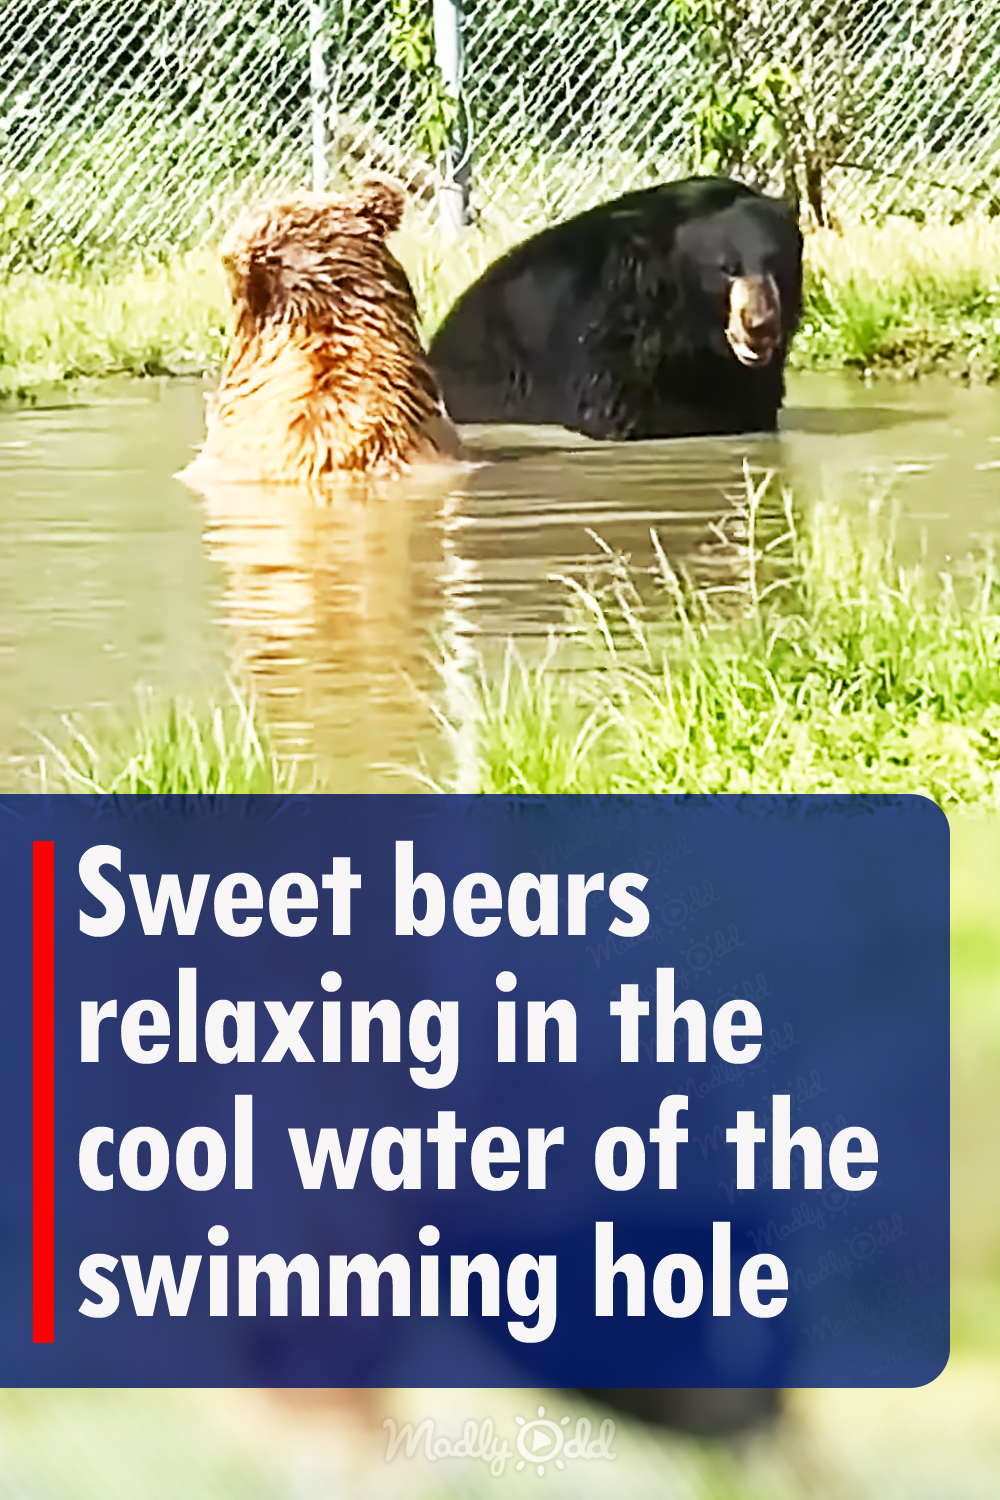 Sweet bears relaxing in the cool water of the swimming hole